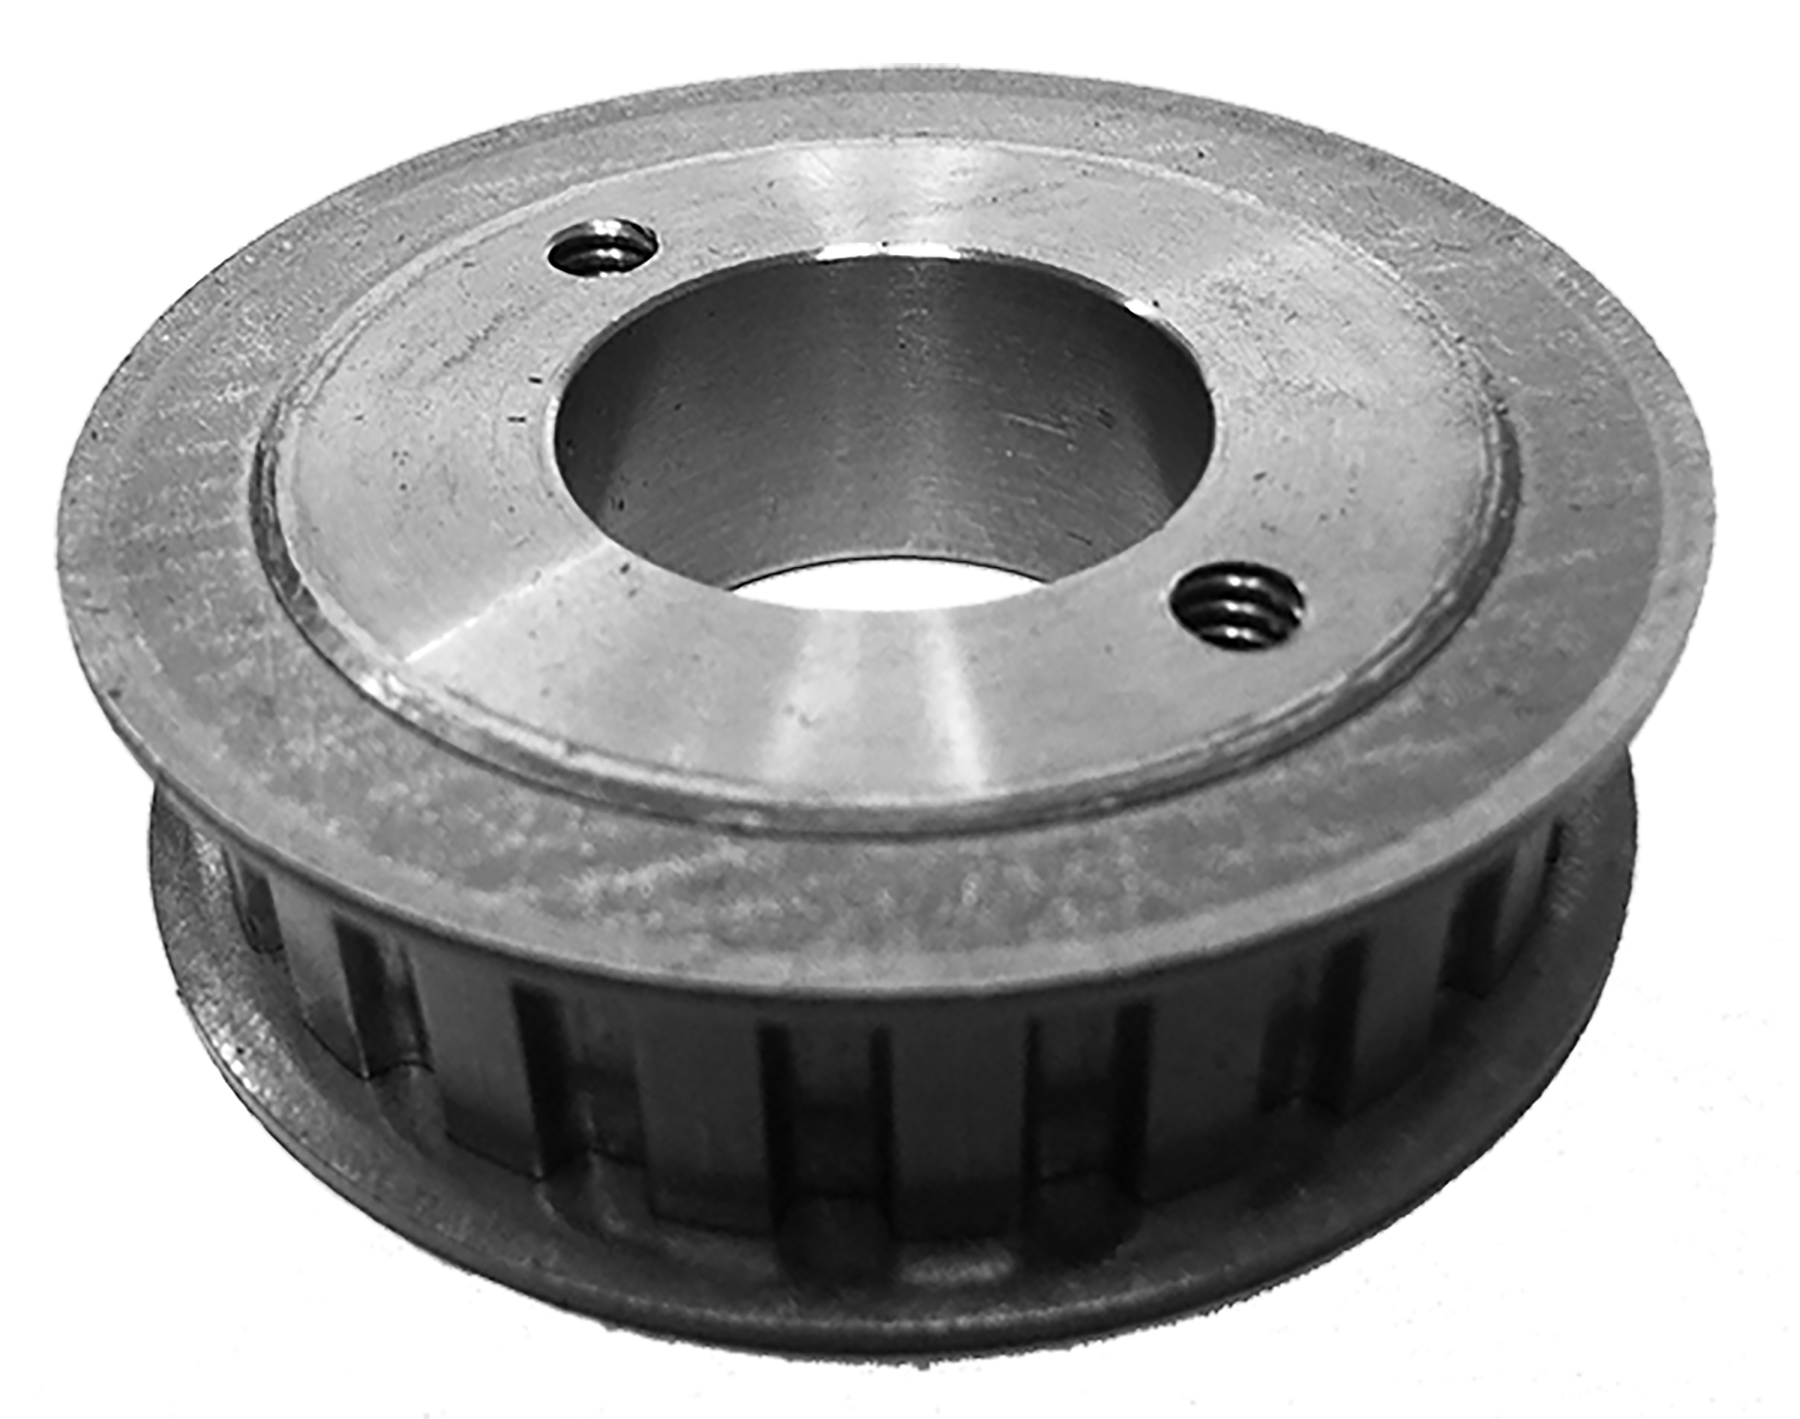 21LG050 - Steel Imperial Pitch Pulleys